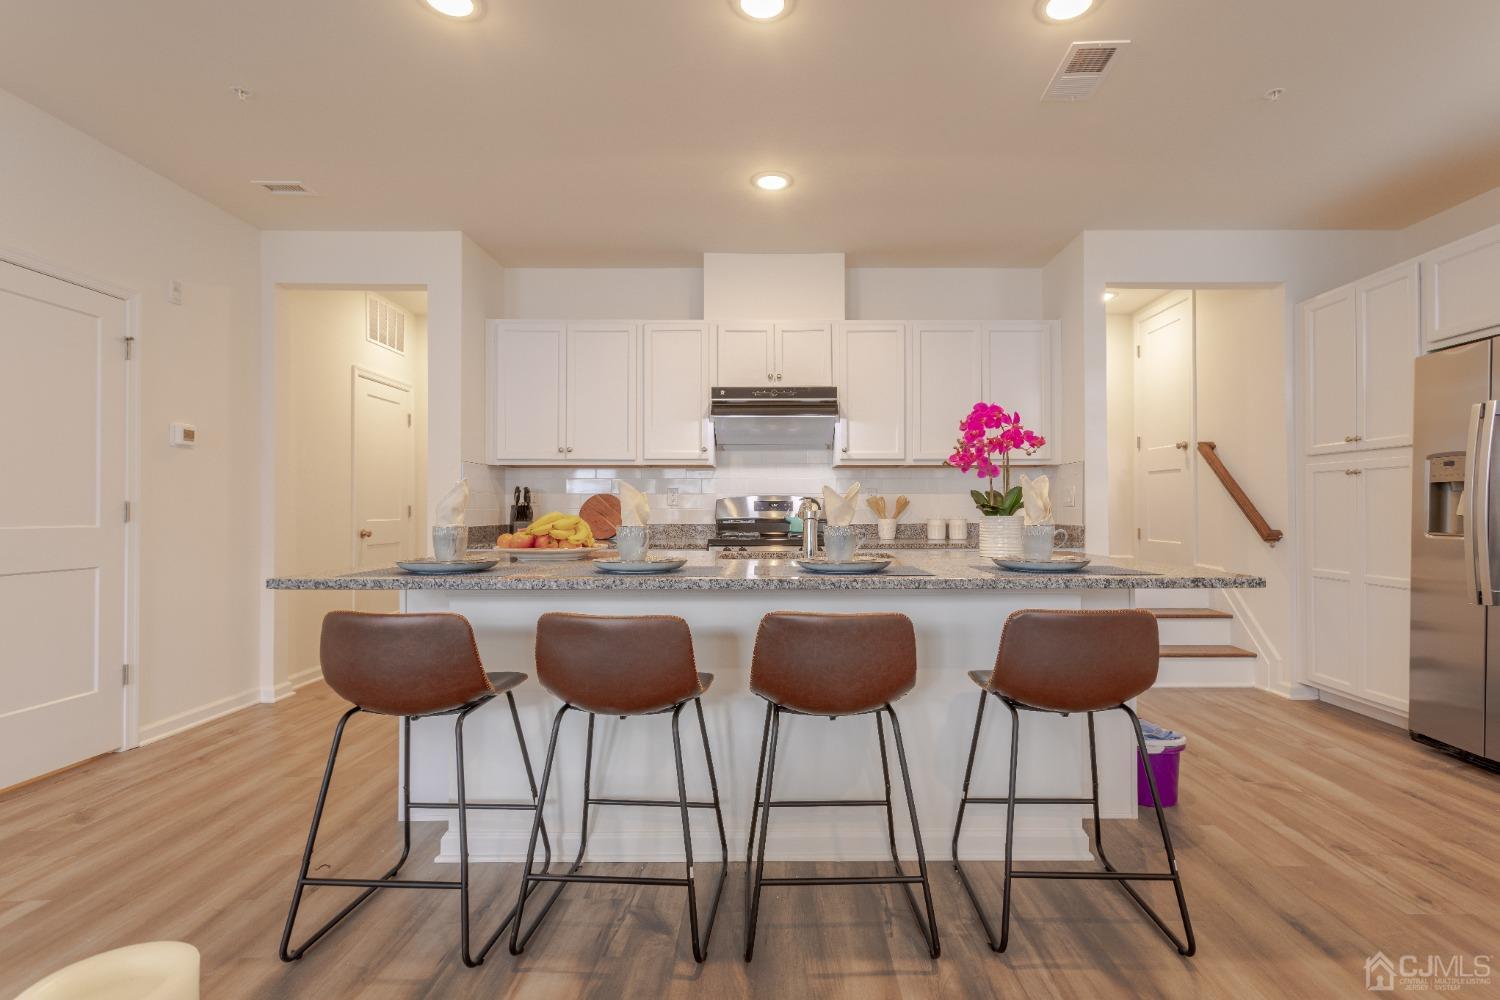 a kitchen with granite countertop a dining table chairs and wooden floor